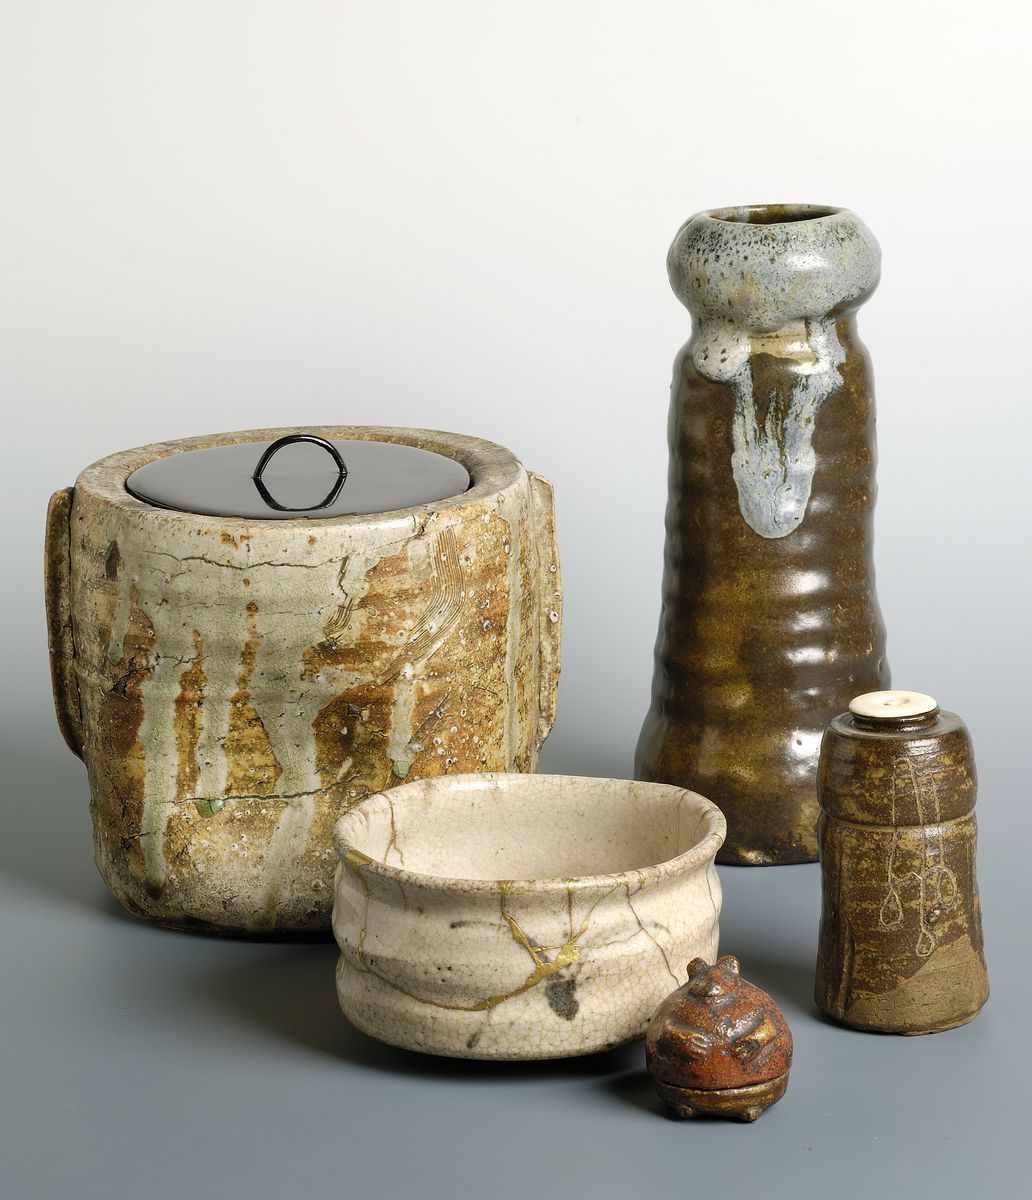 Photograph of an ensemble of Japanese stoneware objects